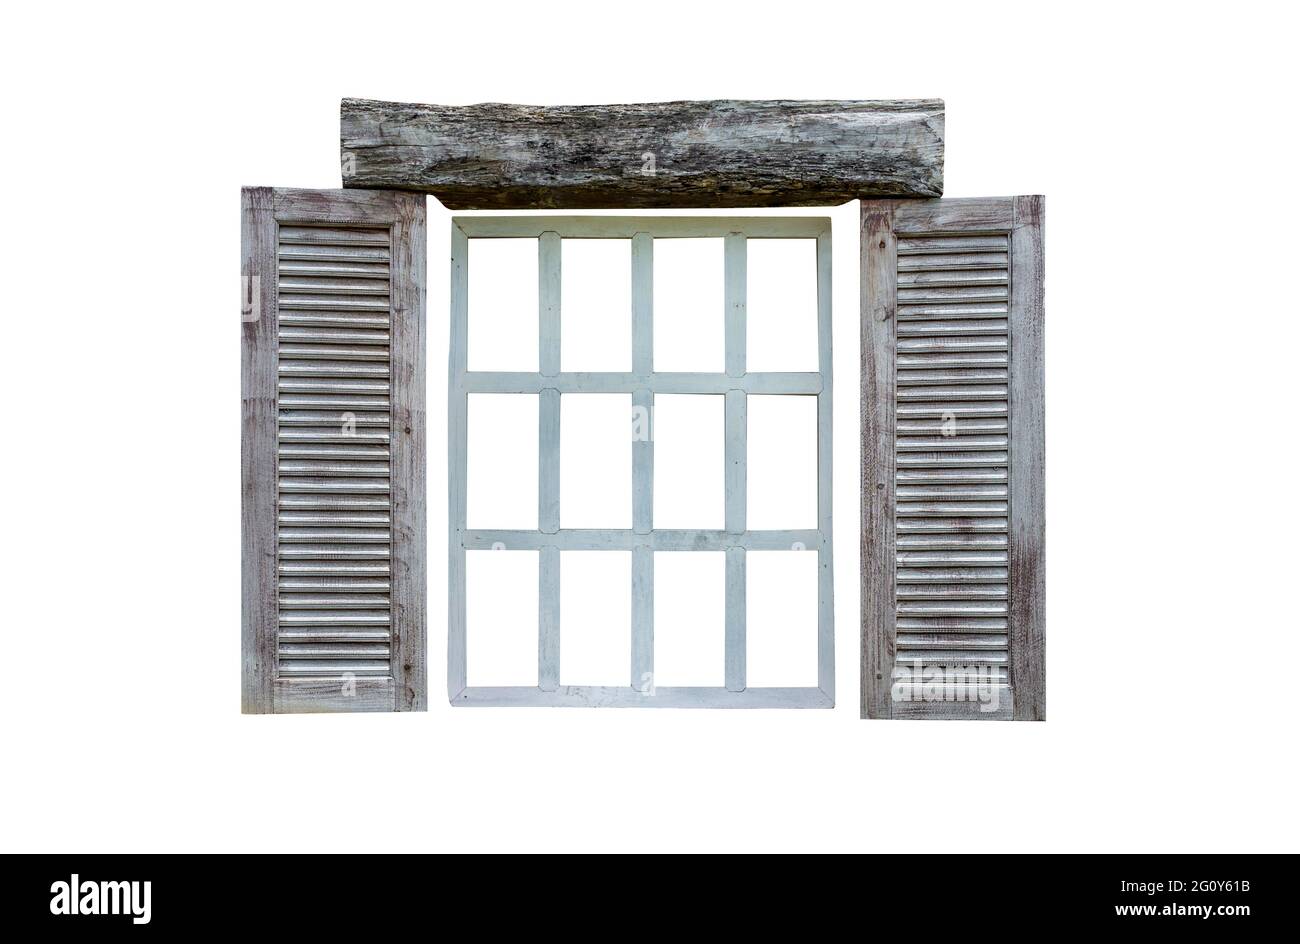 Isolated wooden window frame on white background, twelve panes, old and vintage style wooden window, old by weather condition. Stock Photo